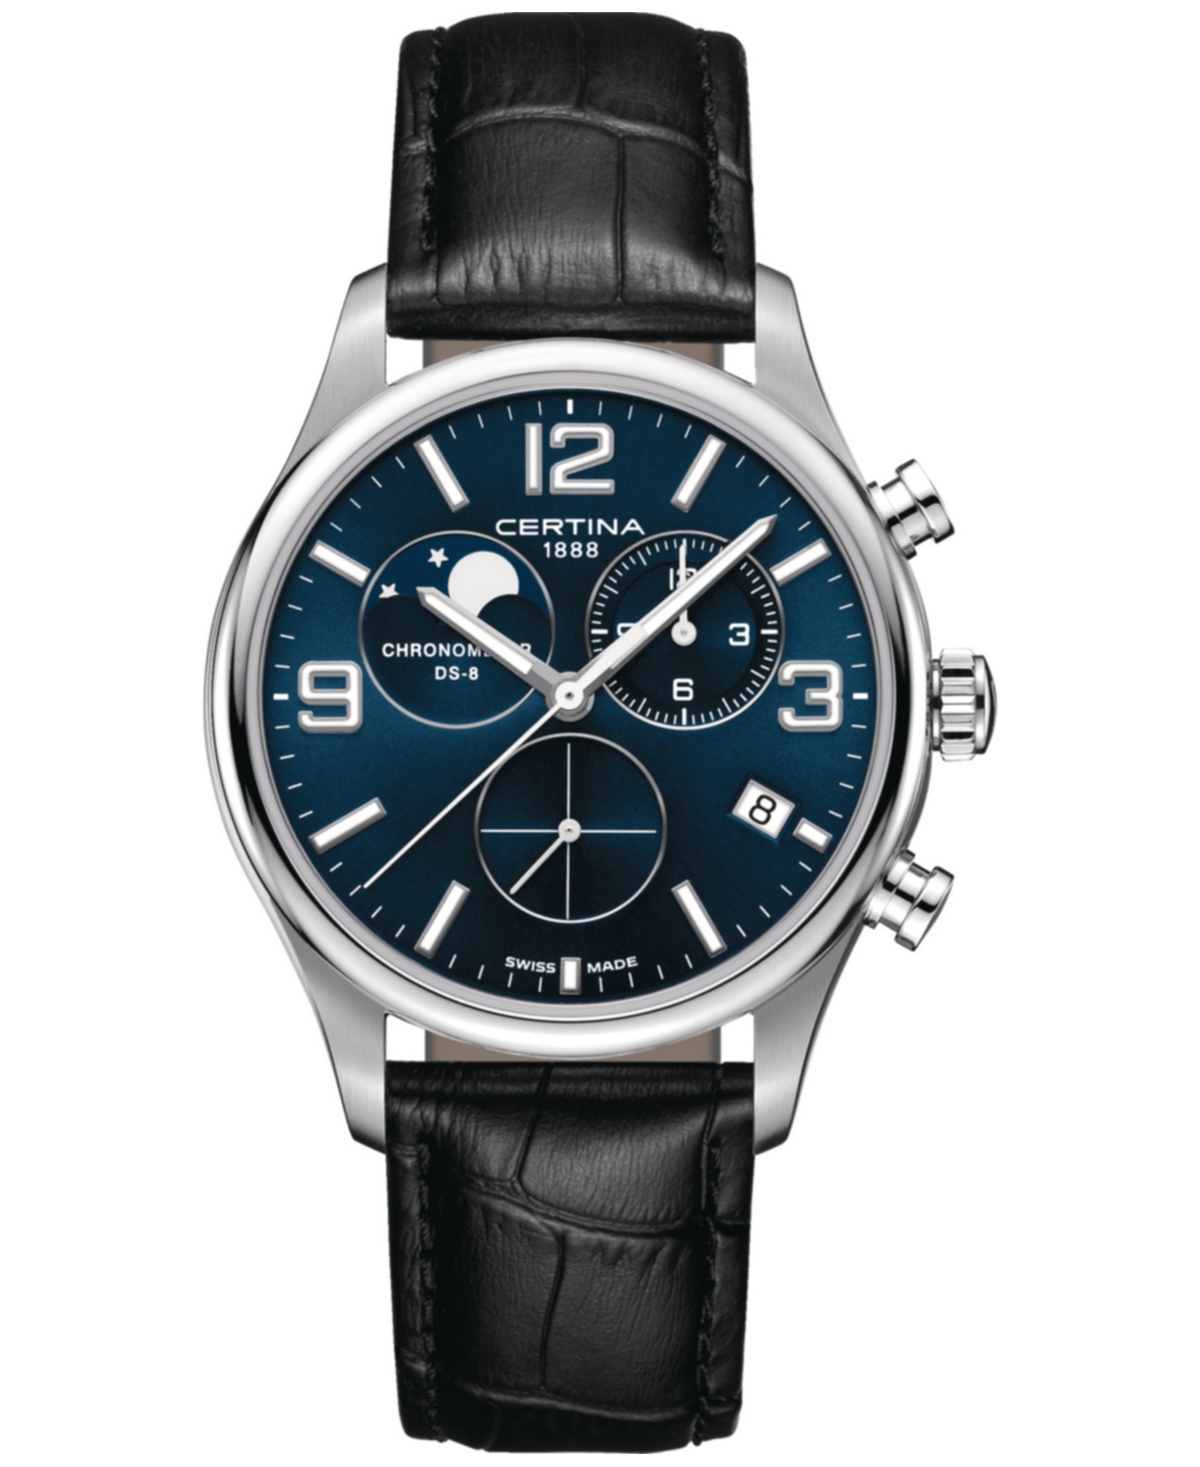 Certina Men's Swiss Chronograph Ds-8 Moon Phase Black Leather Strap Watch 42mm In Blue